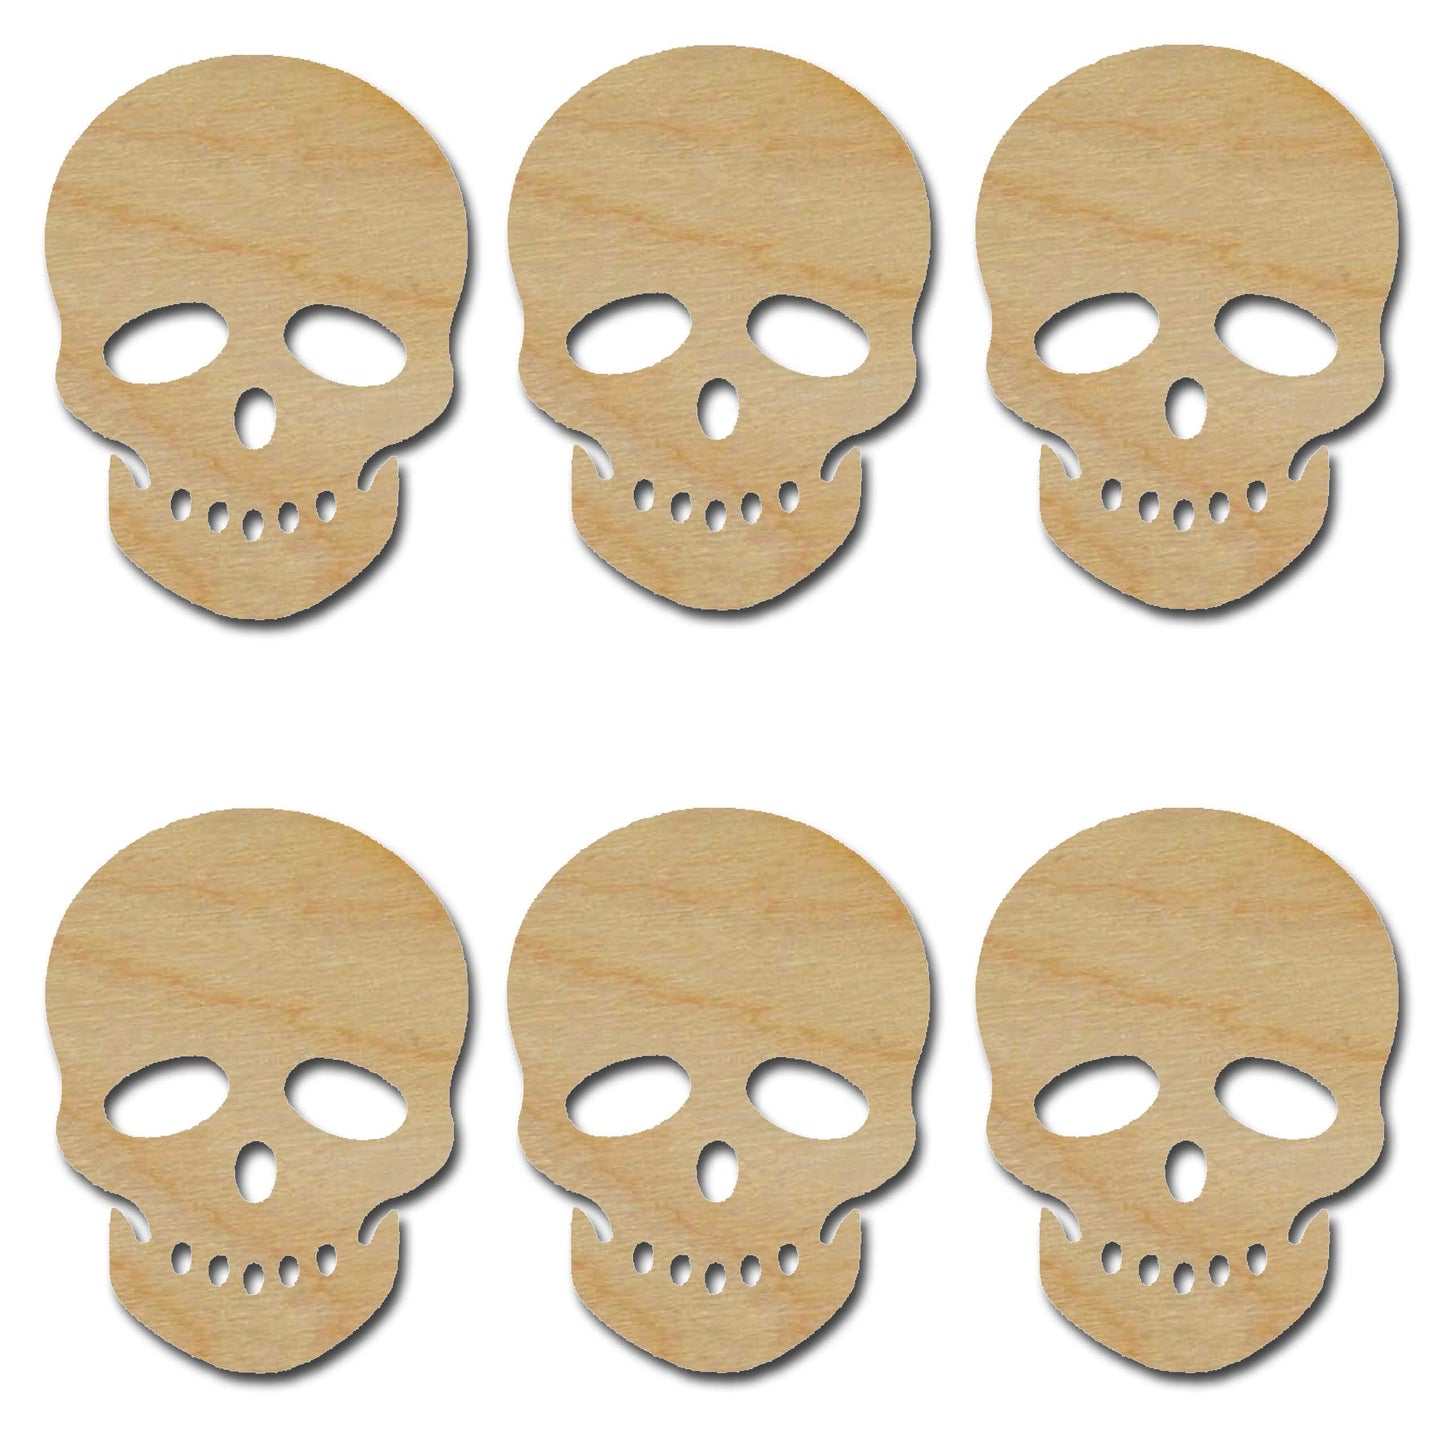 Artistic Craft Supply Skull Shape Unfinished Wood Cut Outs 3" Inch 6 Pieces SKU-03 C